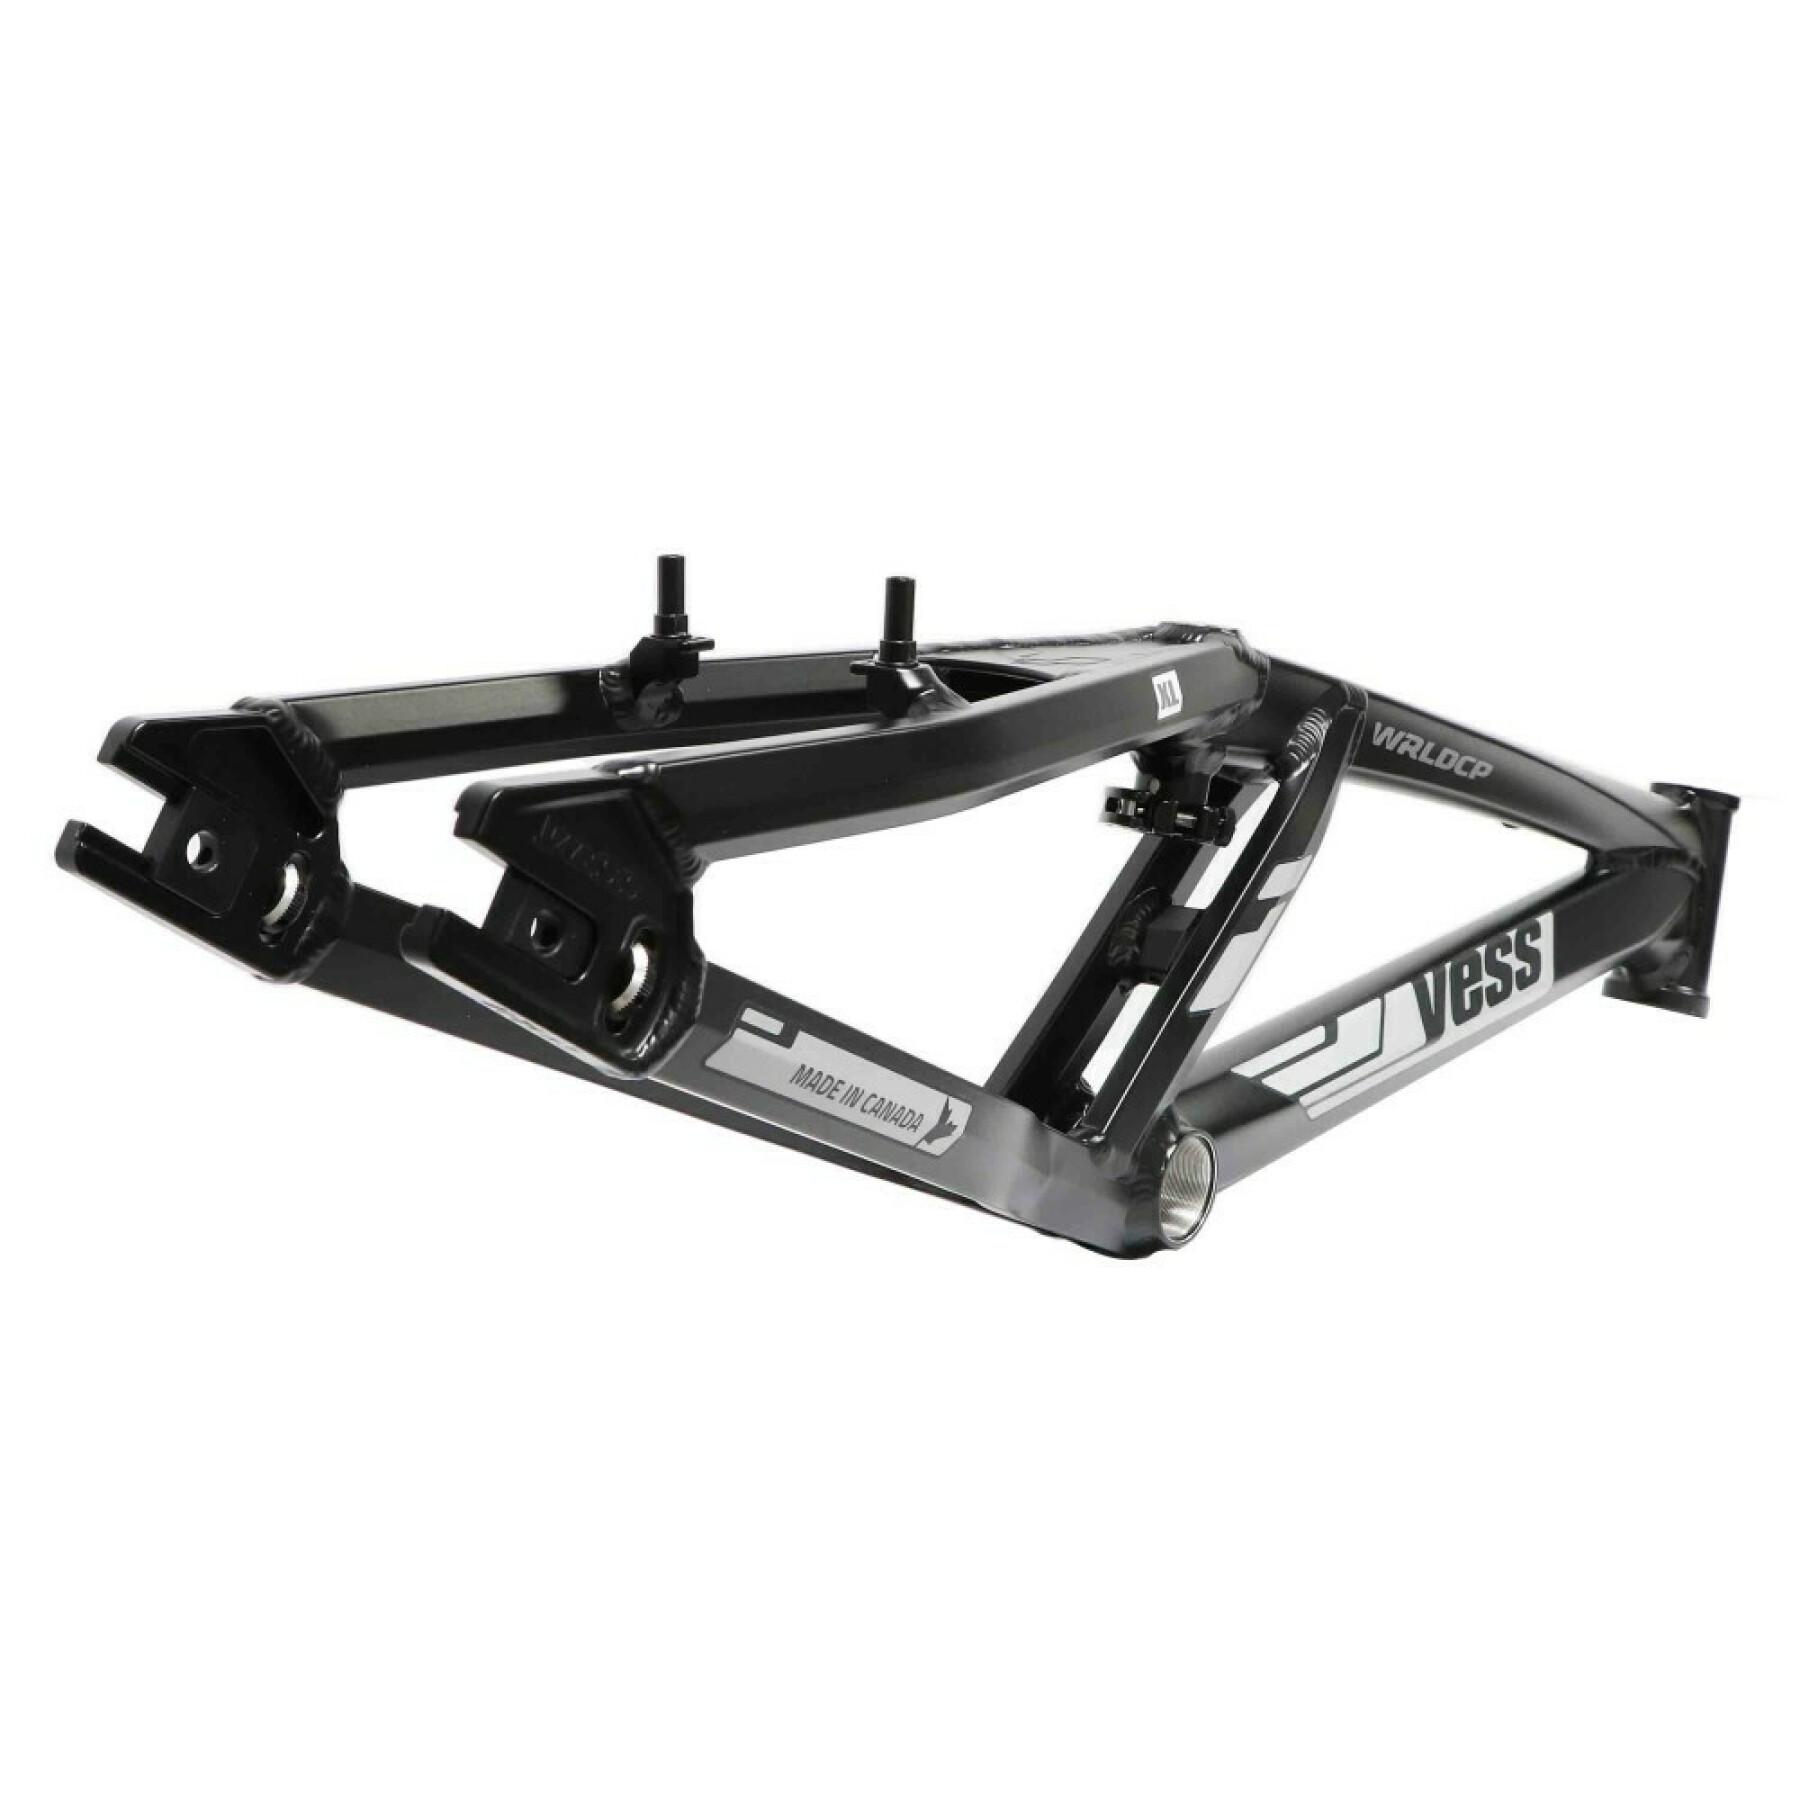 Frame YessBMX elite world cup tapered Pro